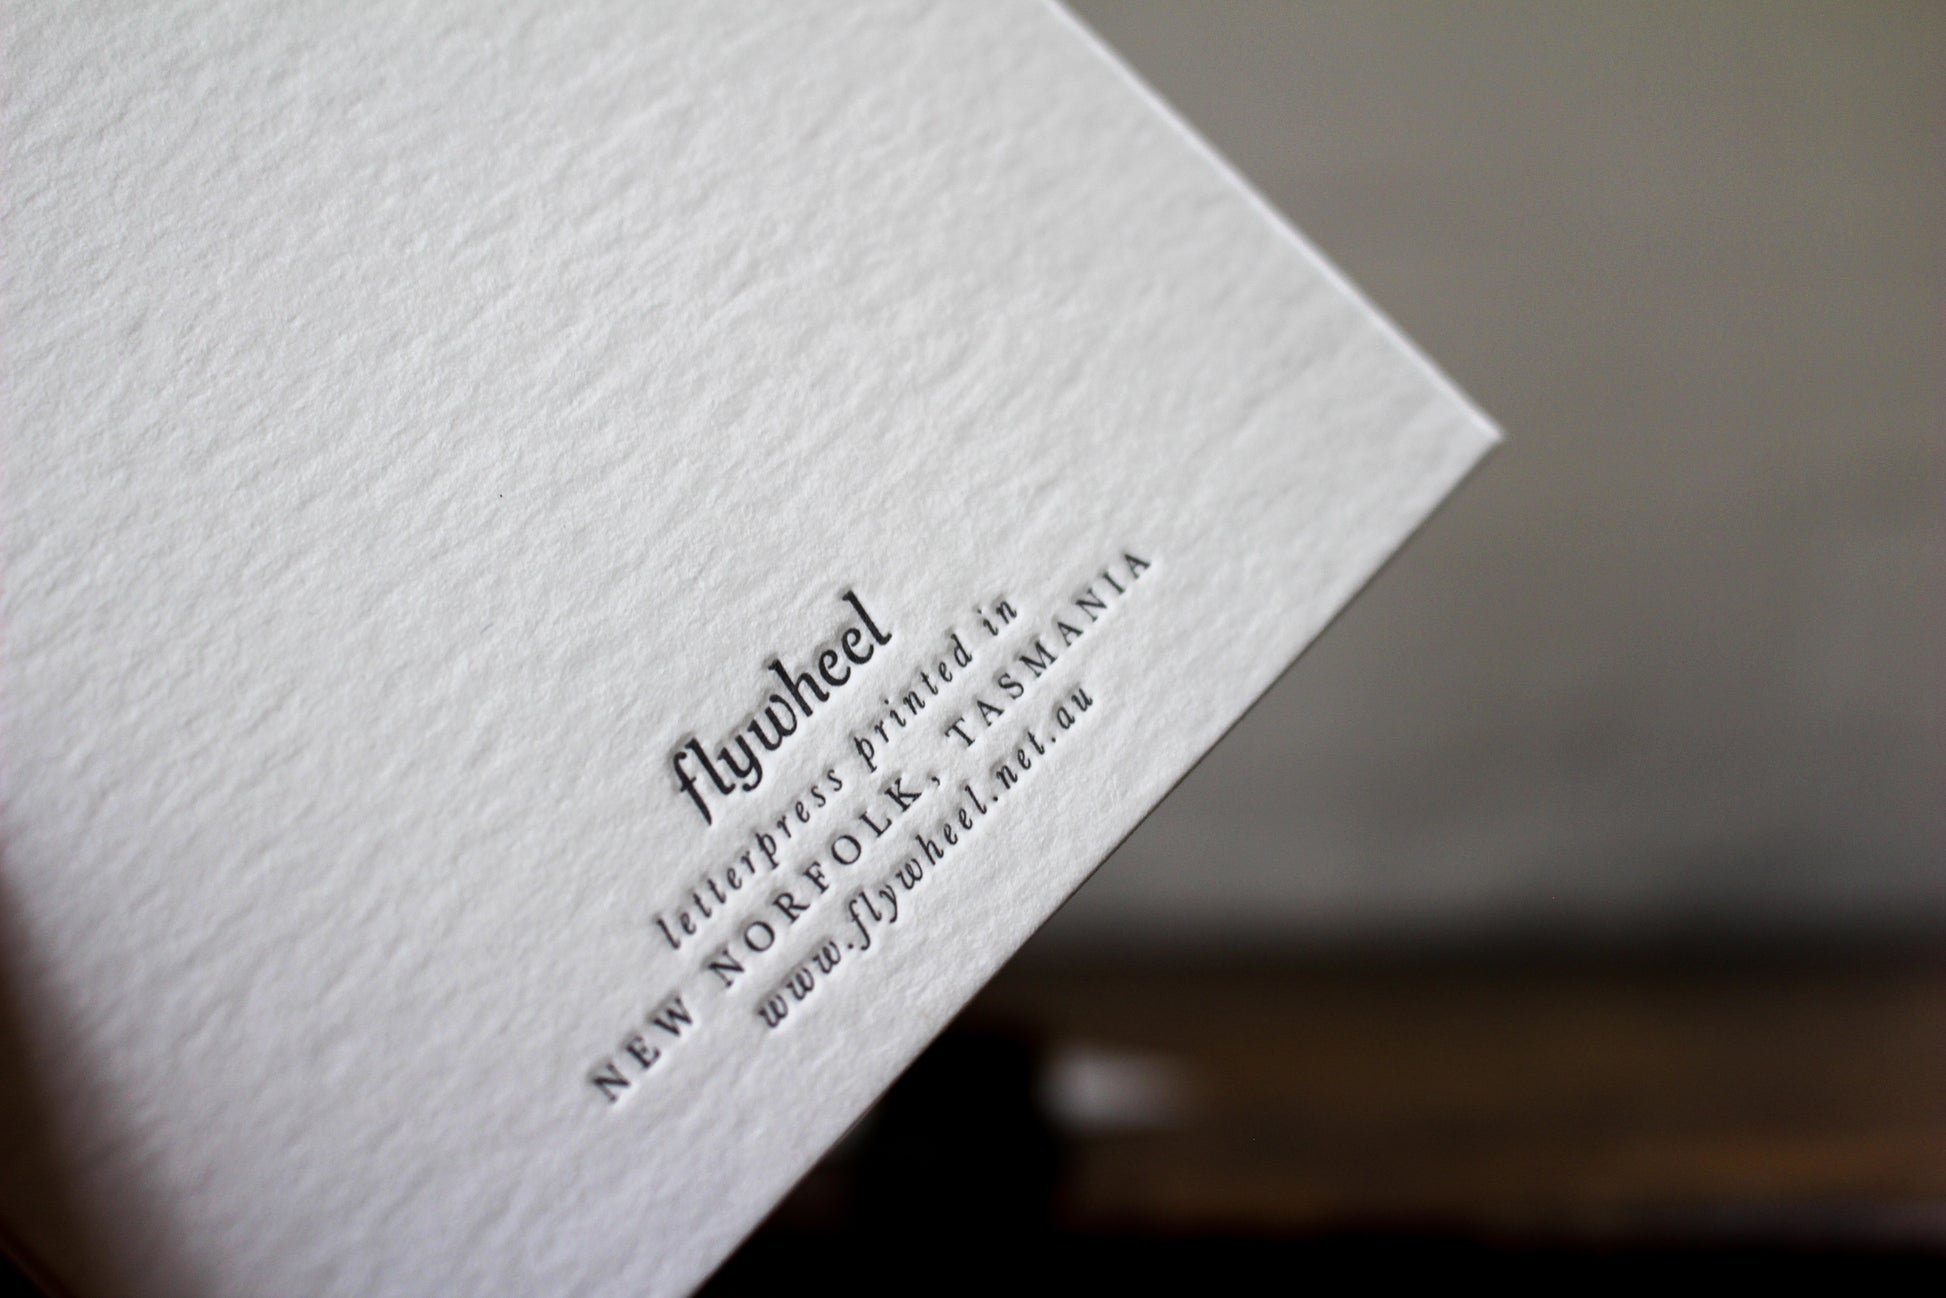 Letterpress Greeting Card - "Wishing you the most perfect of days" | Flywheel | Stationery | Tasmania